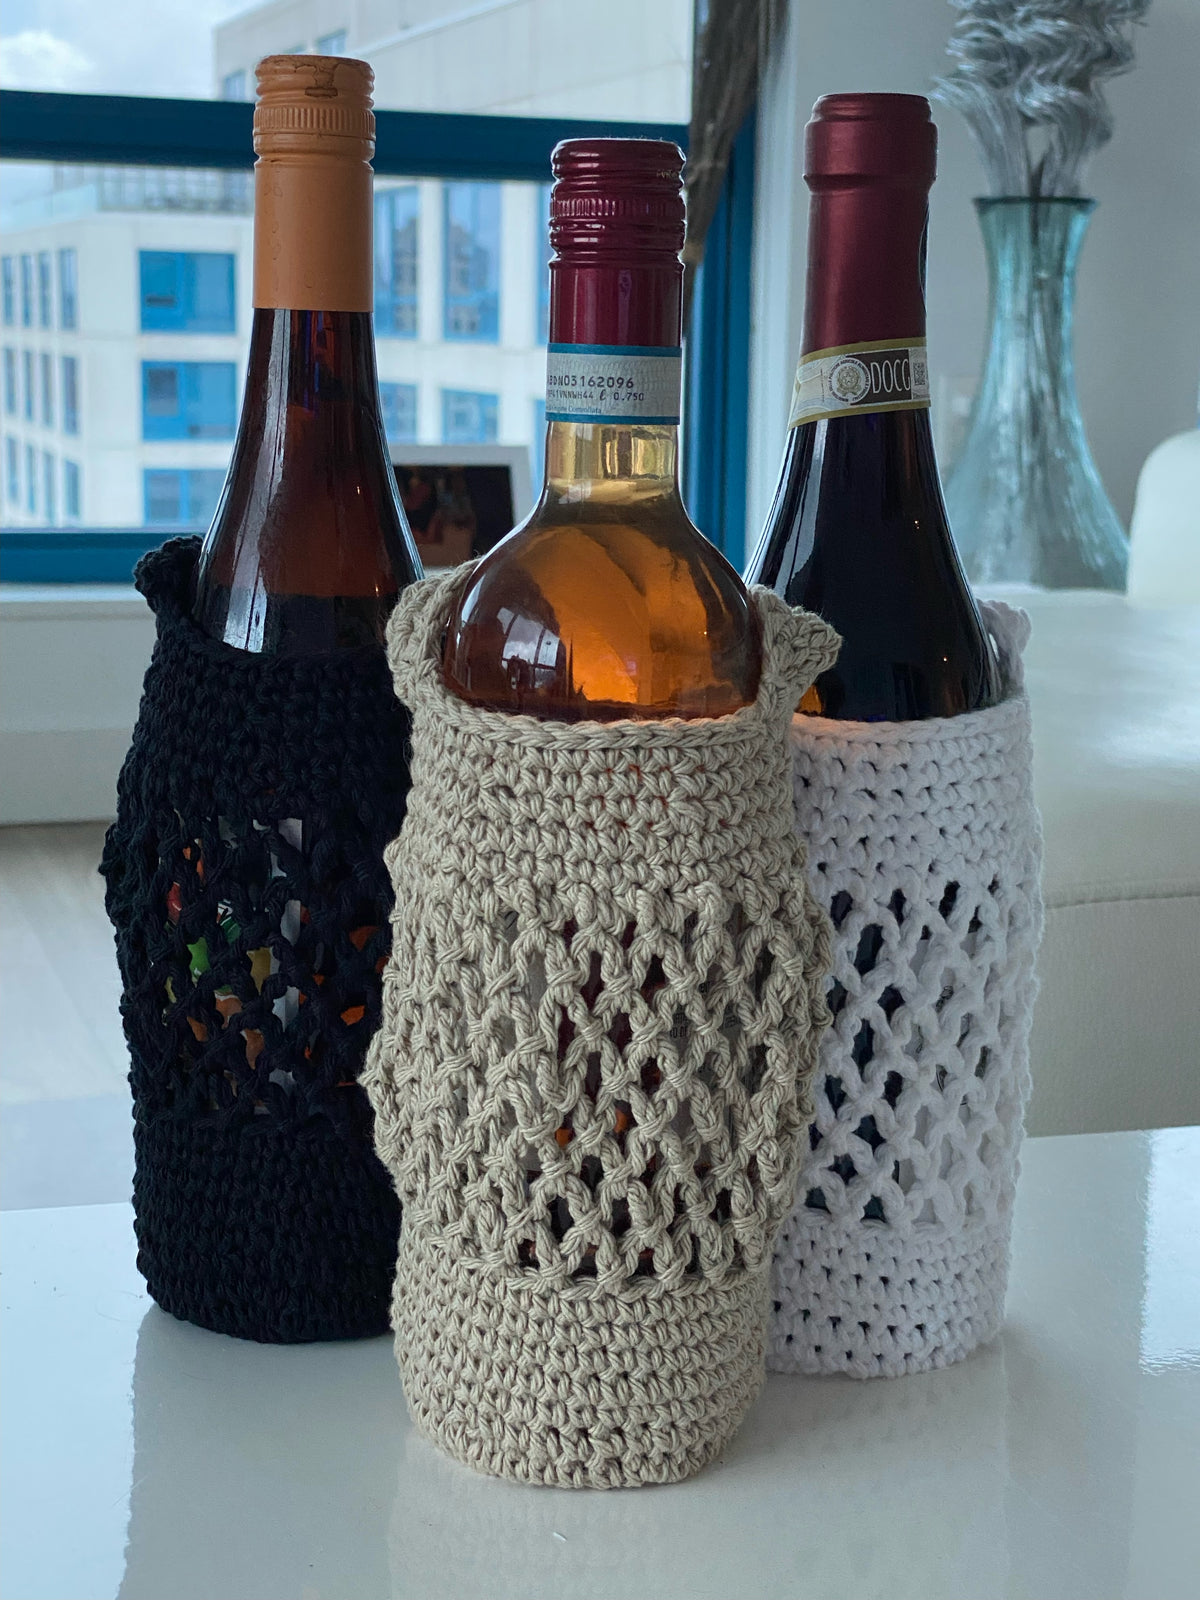 Pictured is our take on the classic "wine tote" in white, black, and beige.